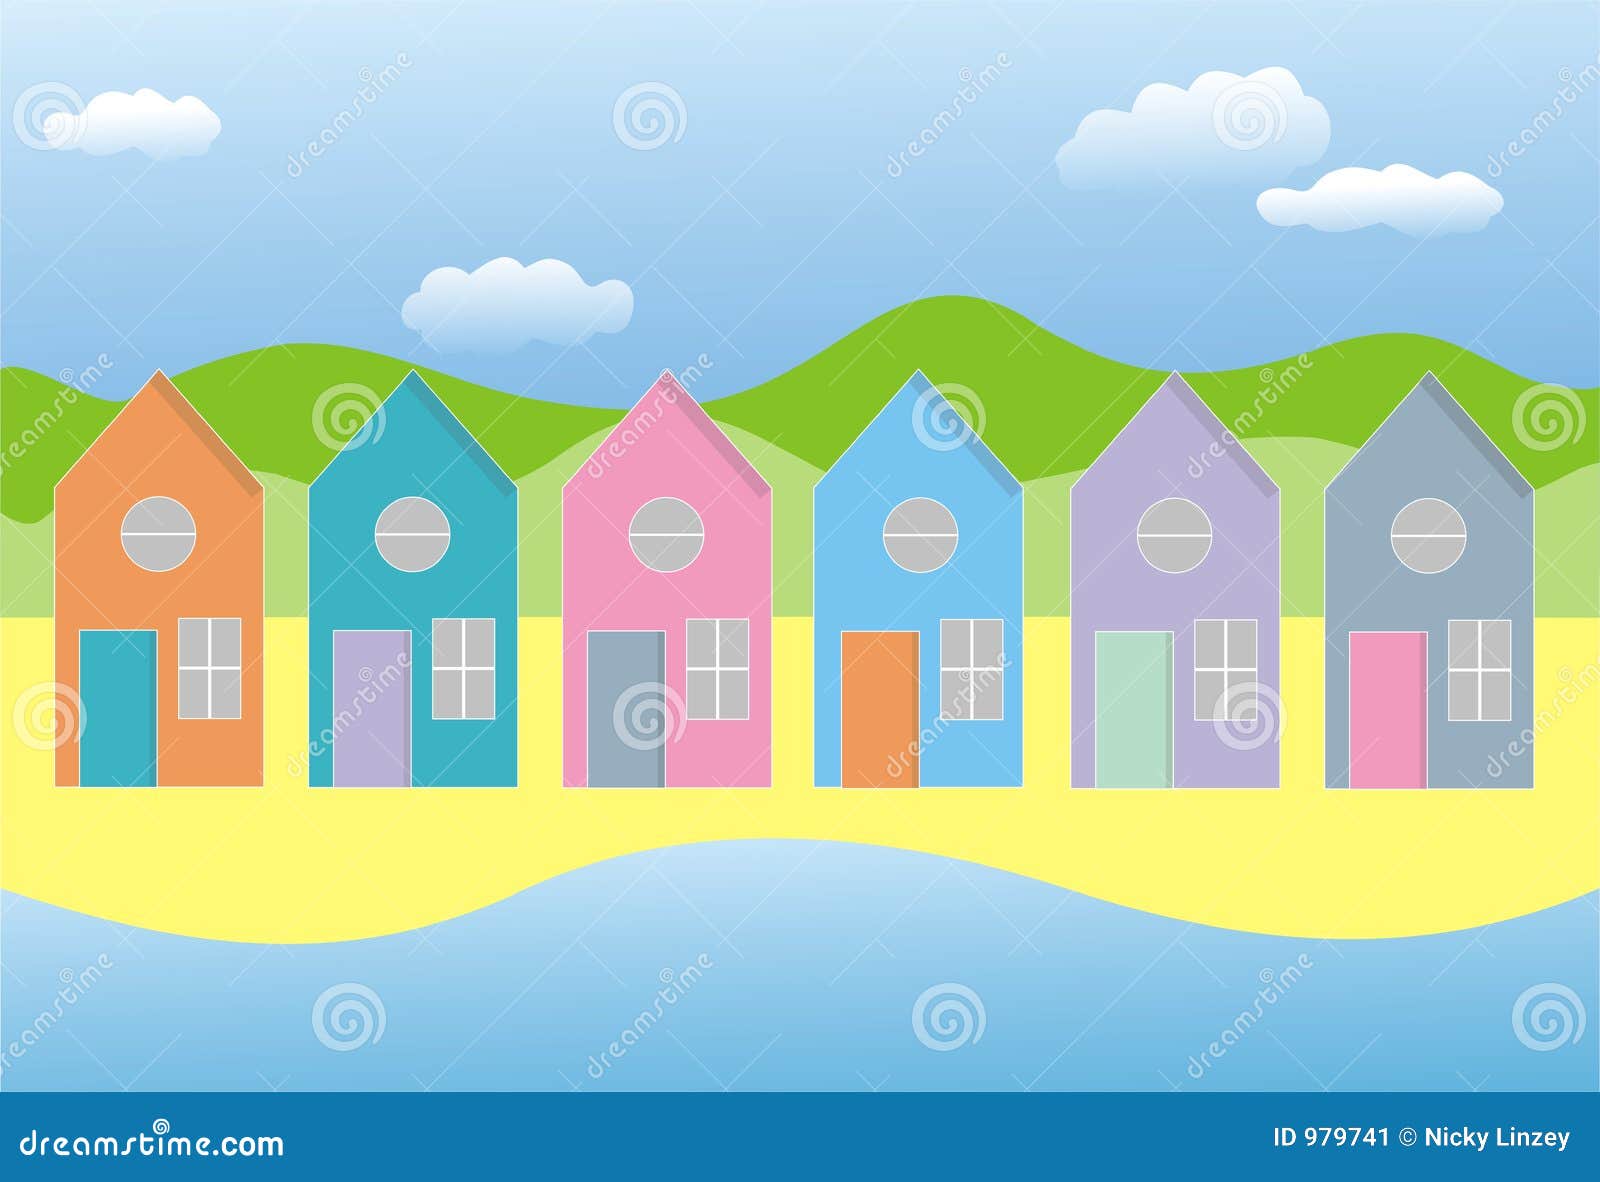 row of houses clipart - photo #37